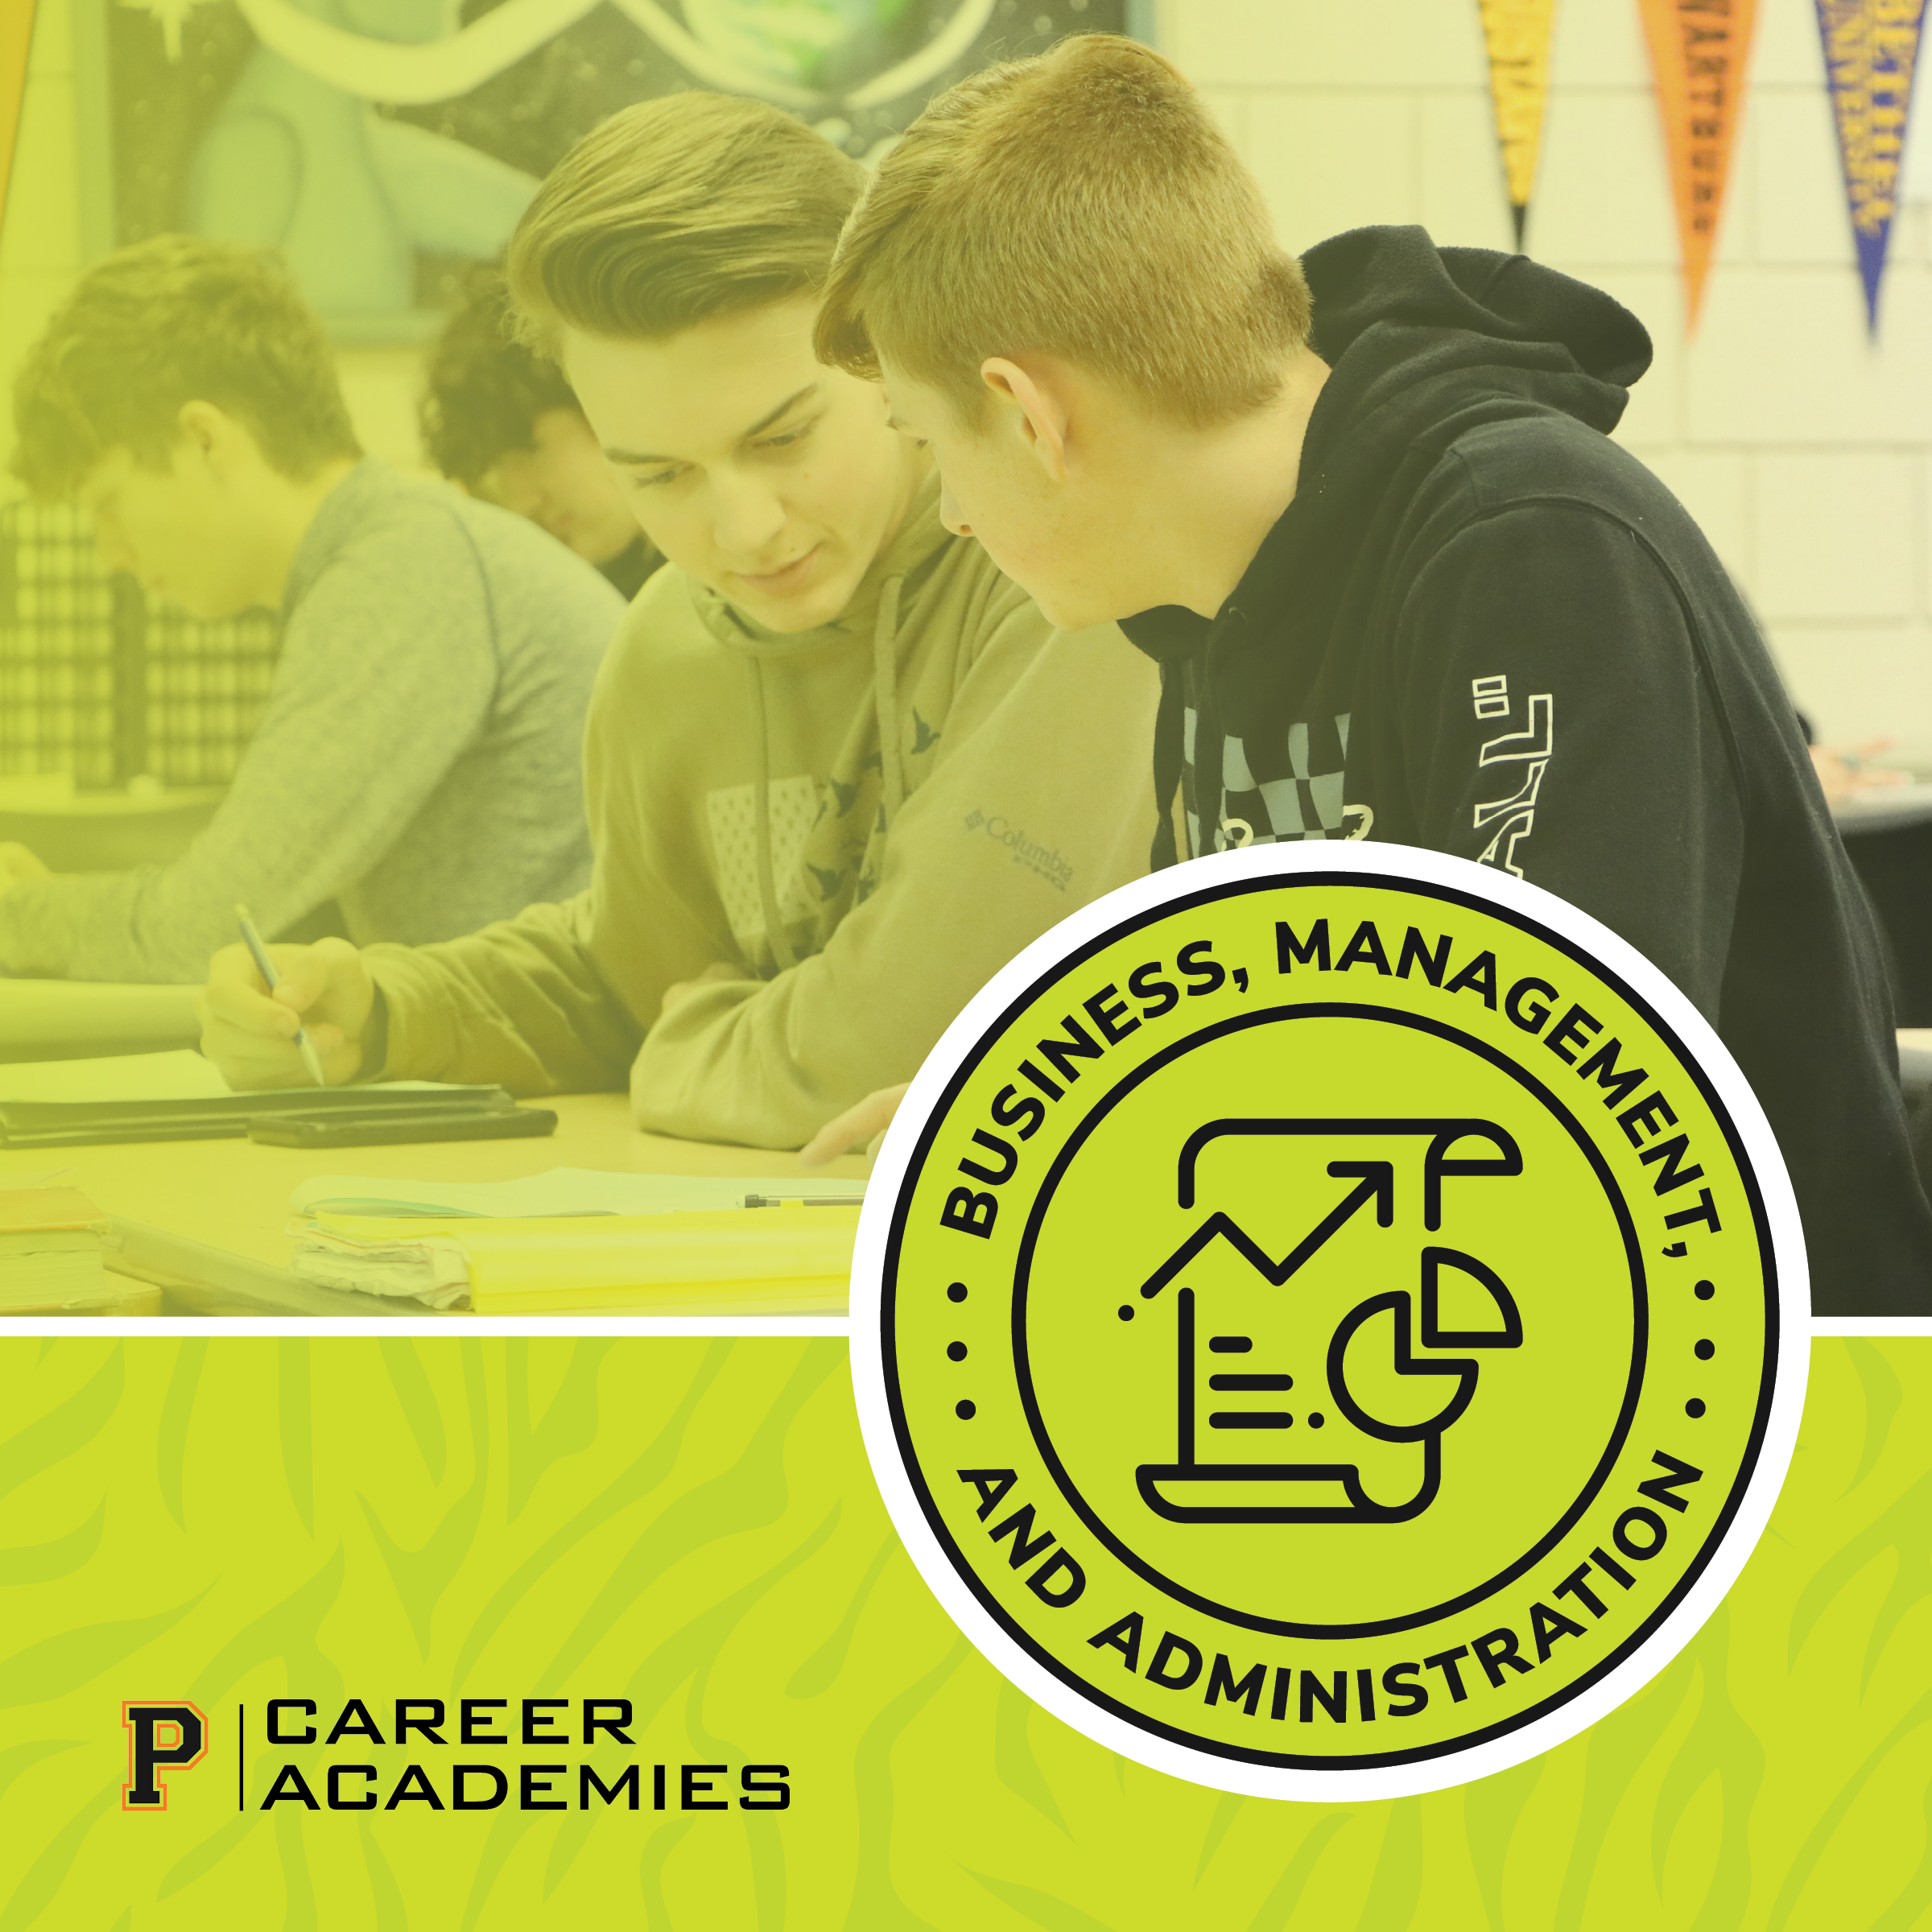 p career academies business, management and administration